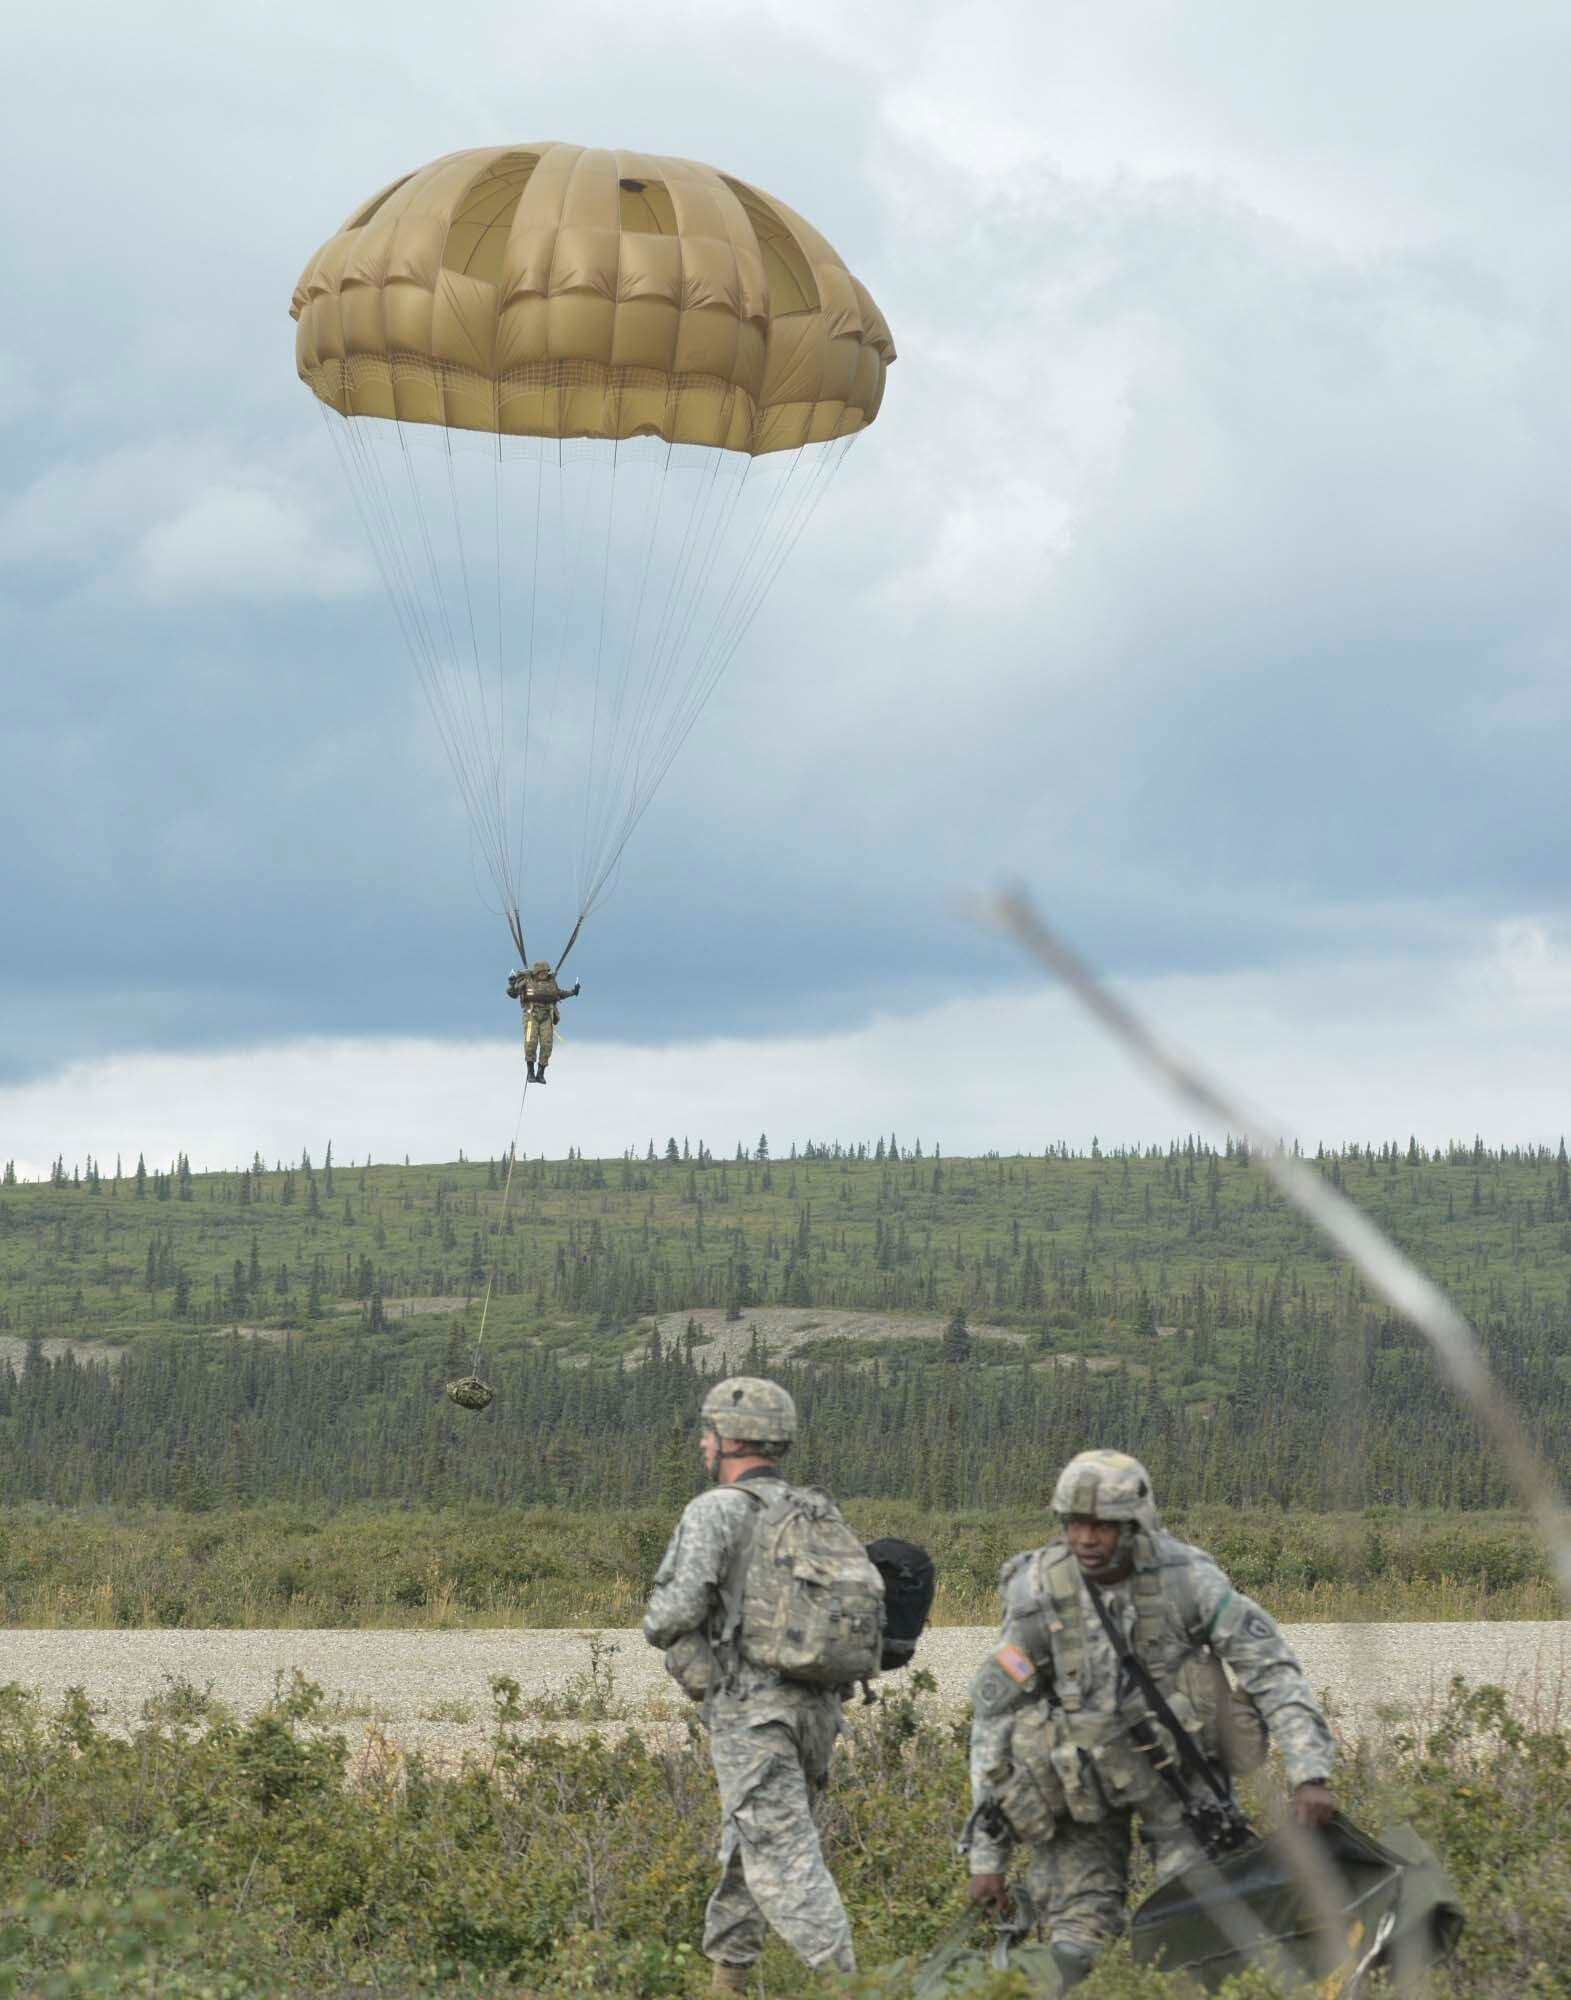 A Japan Ground Self-Defense Forces member from the 1st Airborne Brigade parachutes to the ground while 4th Brigade (Airborne), 25th Infantry Division paratroopers perform parachute recovery at Fort Greely, Alaska, Aug. 12. This event was part of Exercise Arctic Aurora 2015. (U.S. Army photo by Staff Sgt. Daniel Love)